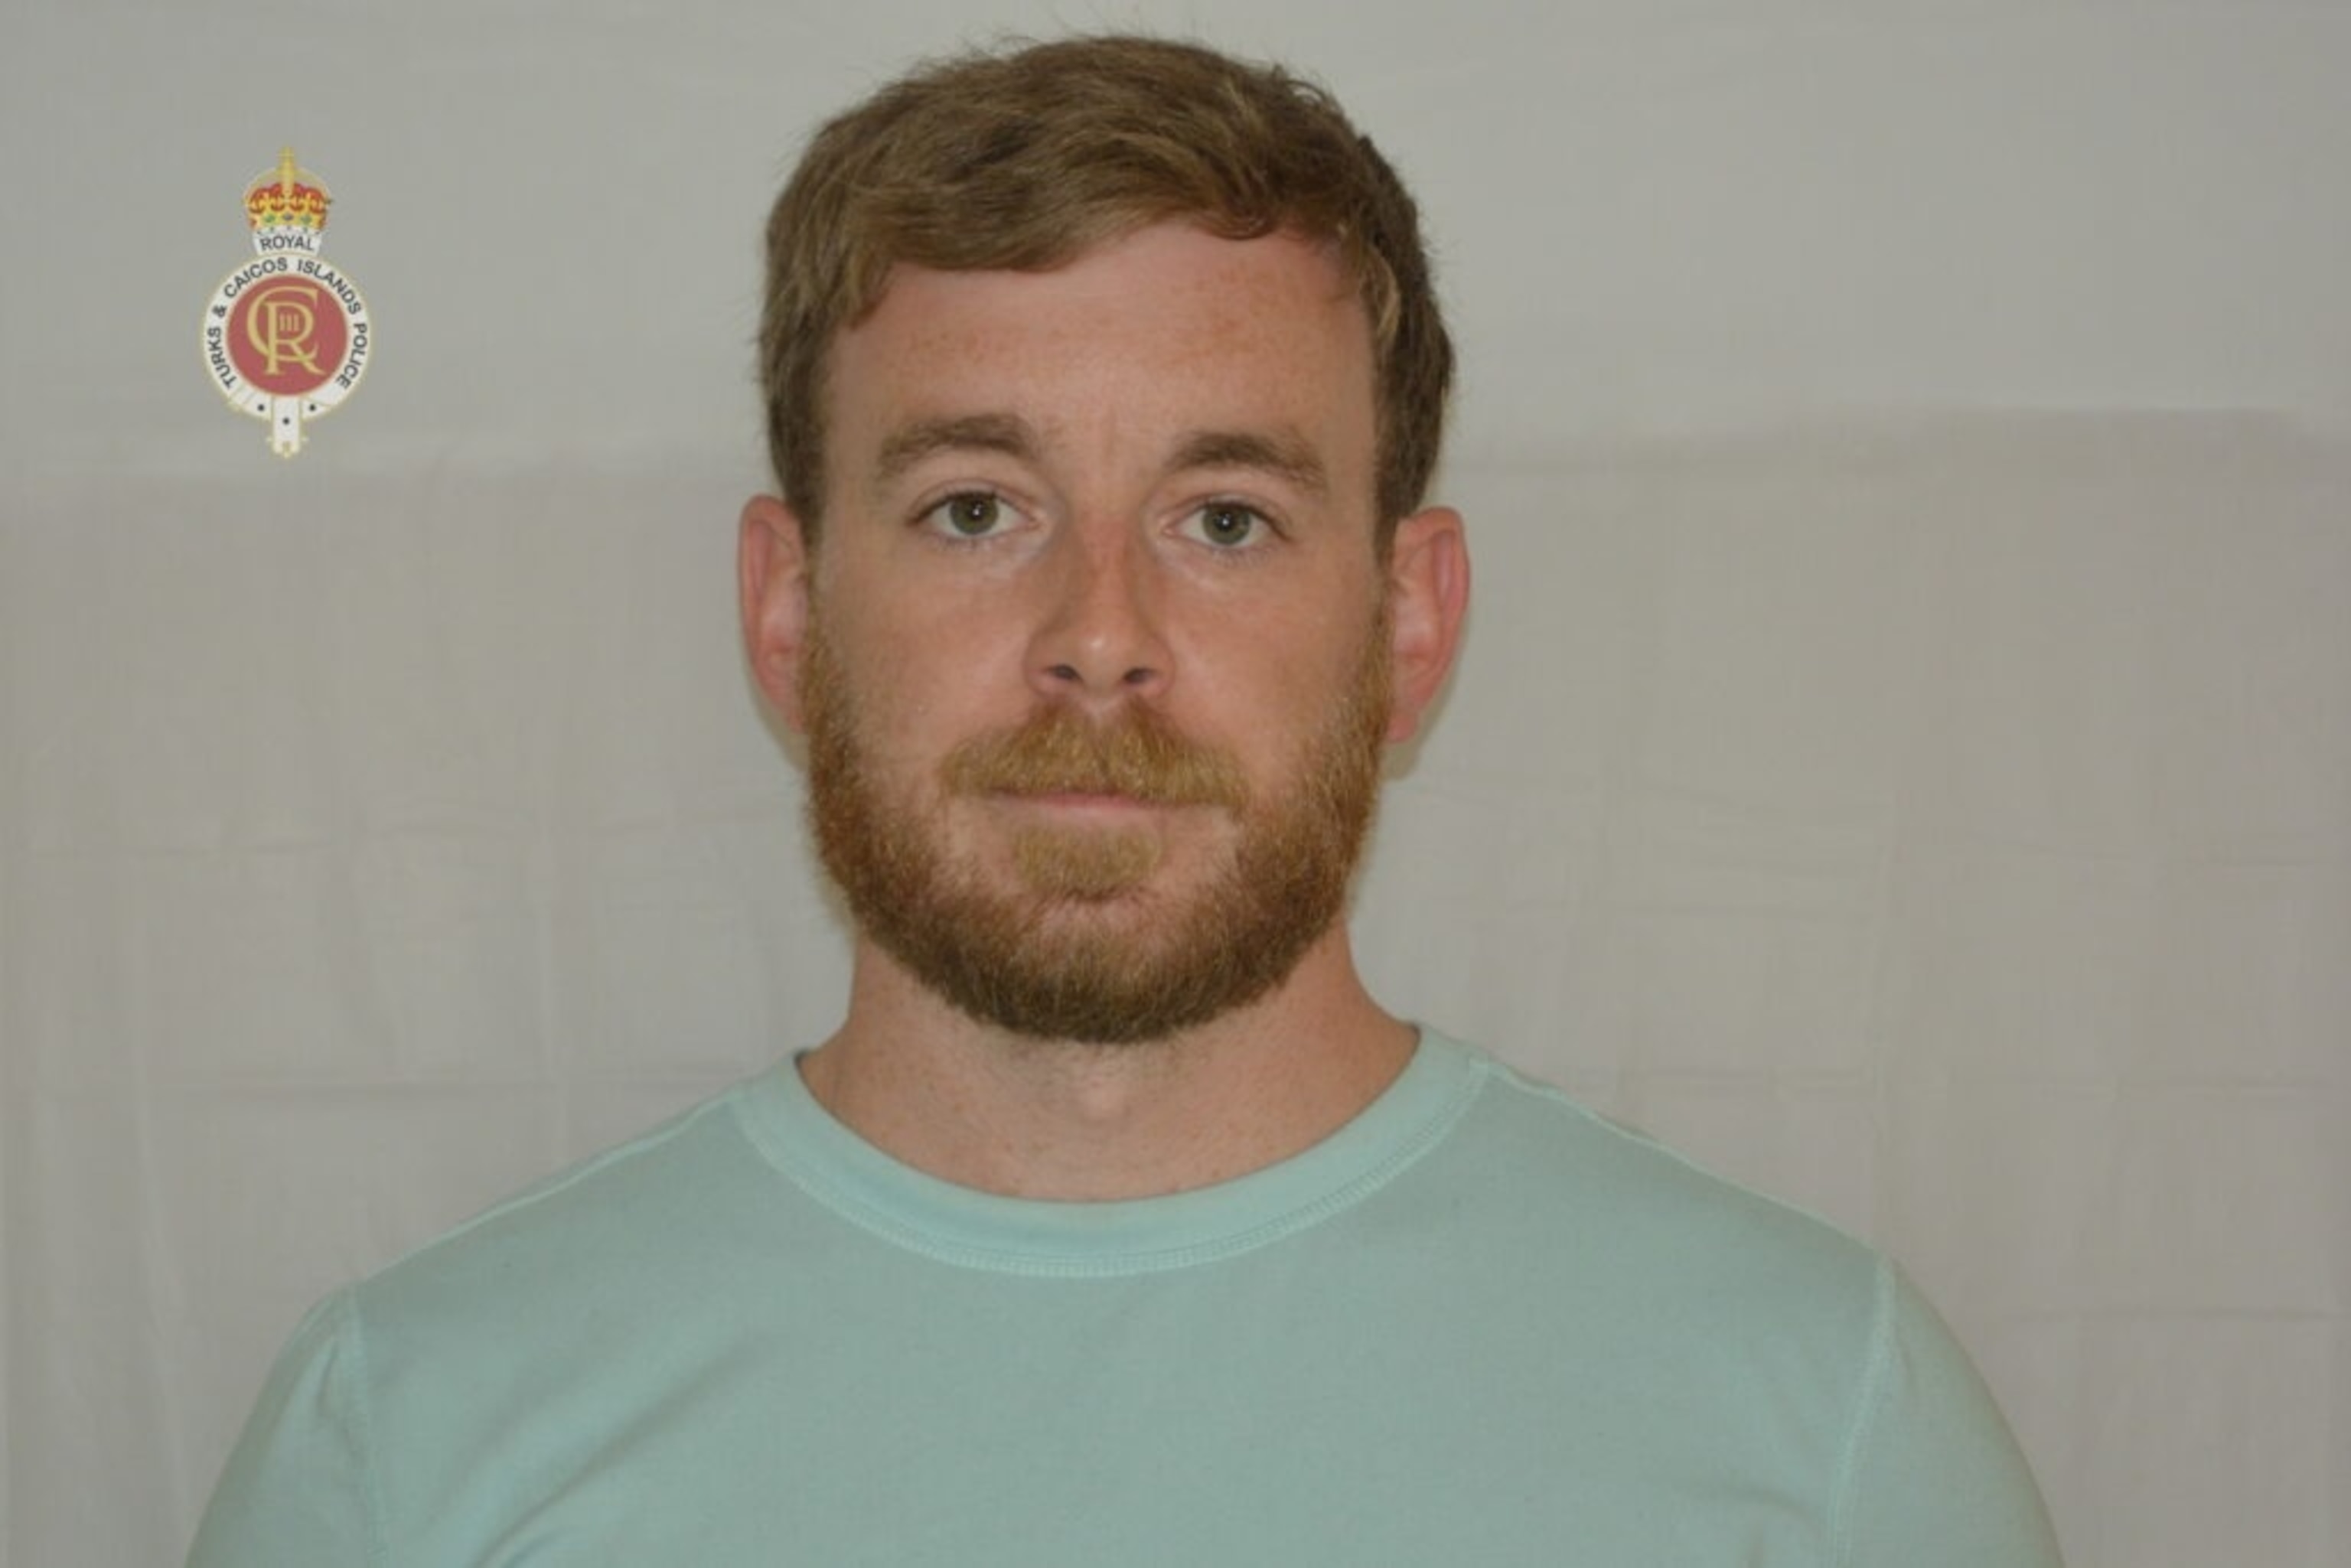 PHOTO: Tyler Scott Wenrich, 31, of Virginia, was charged with possession of ammunition in Turks and Caicos when trying to return to his cruise ship in April.